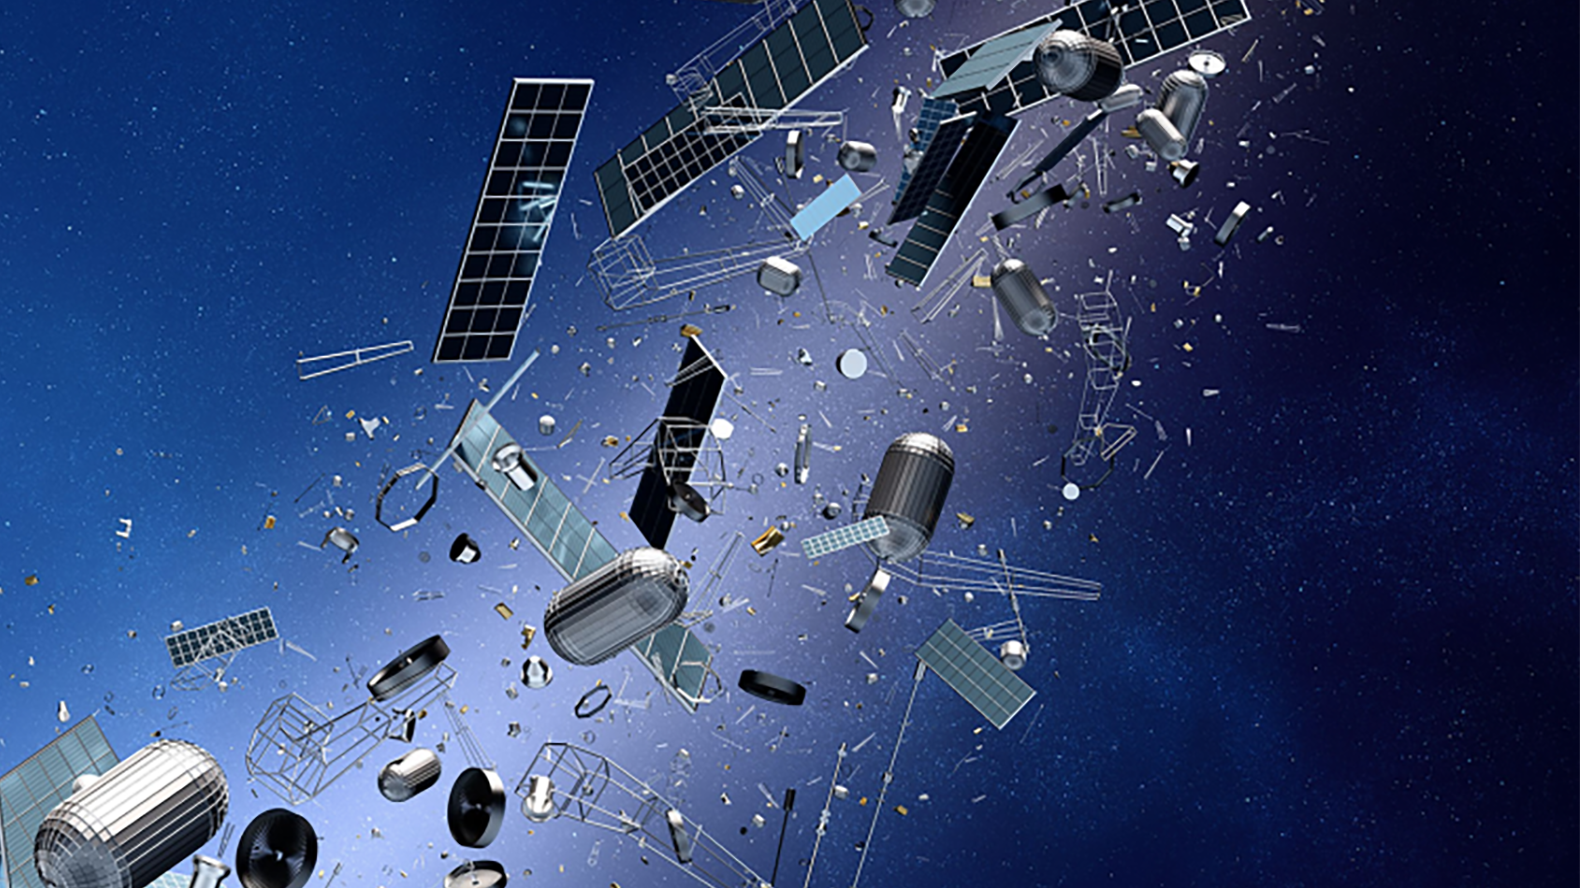 Senate Commerce Committee leaders push bill for space debris cleanup